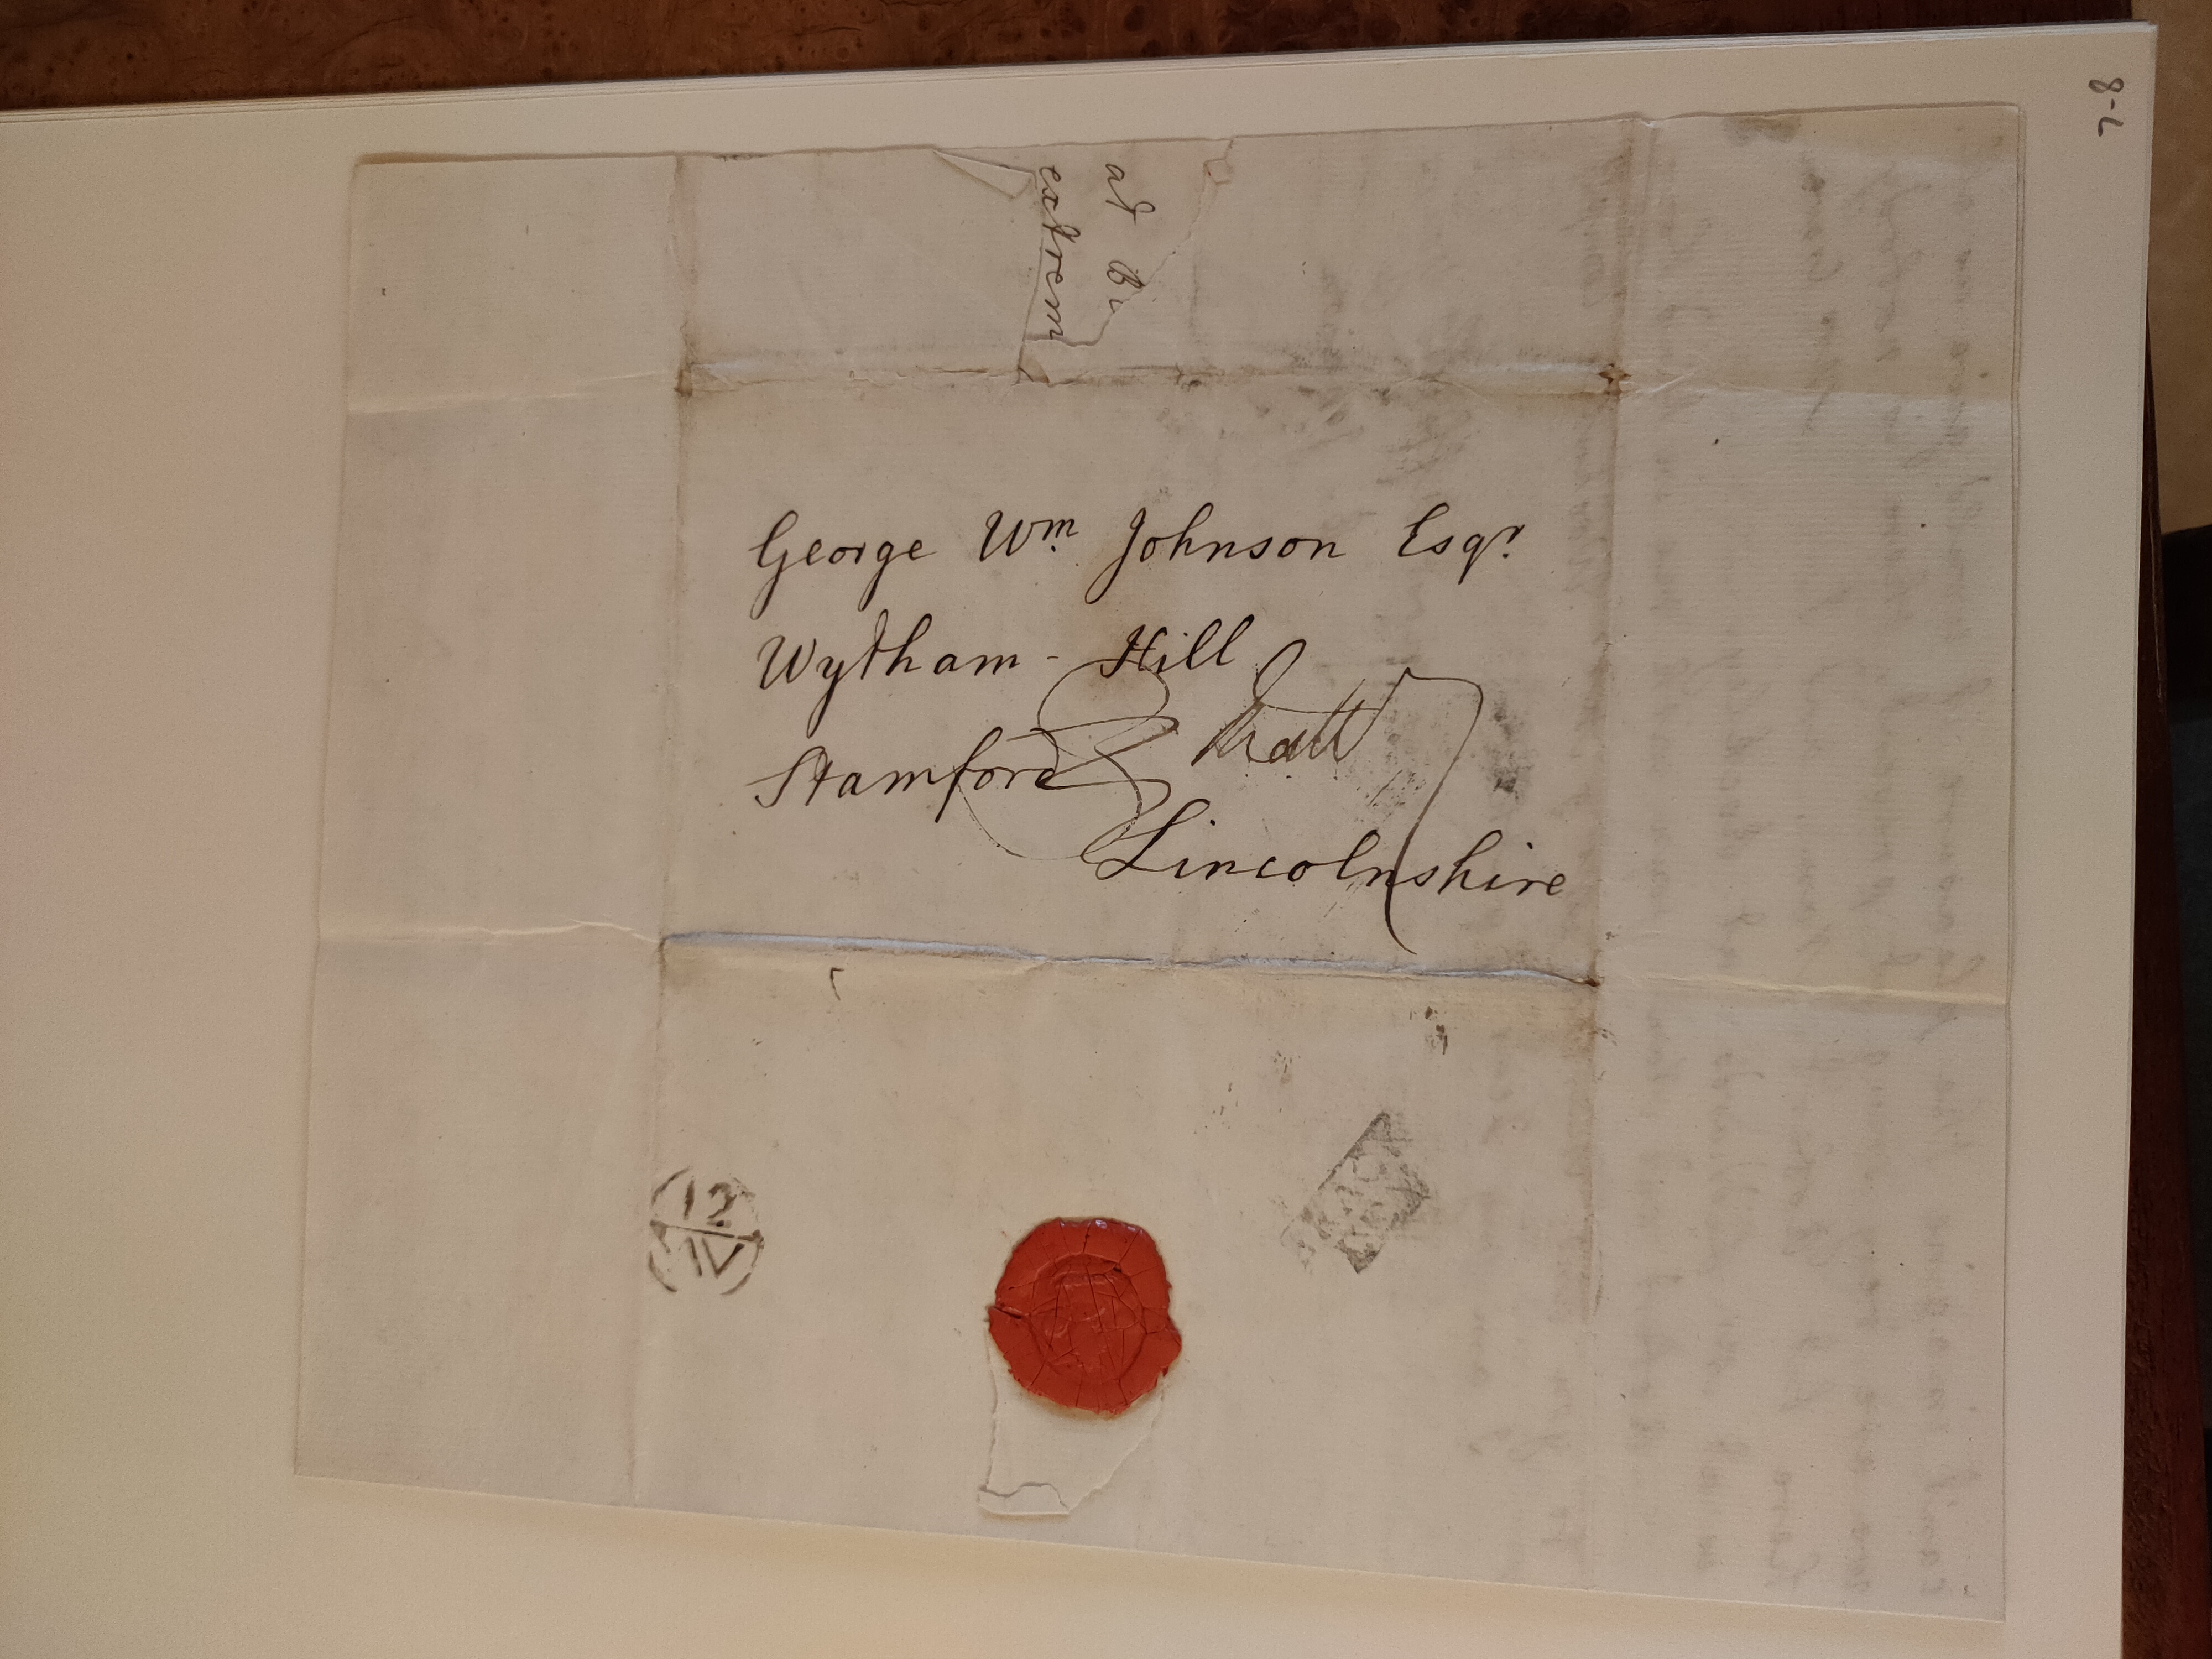 Image #4 of letter: Barbara Johnson to George William Johnson, 10 August 1773